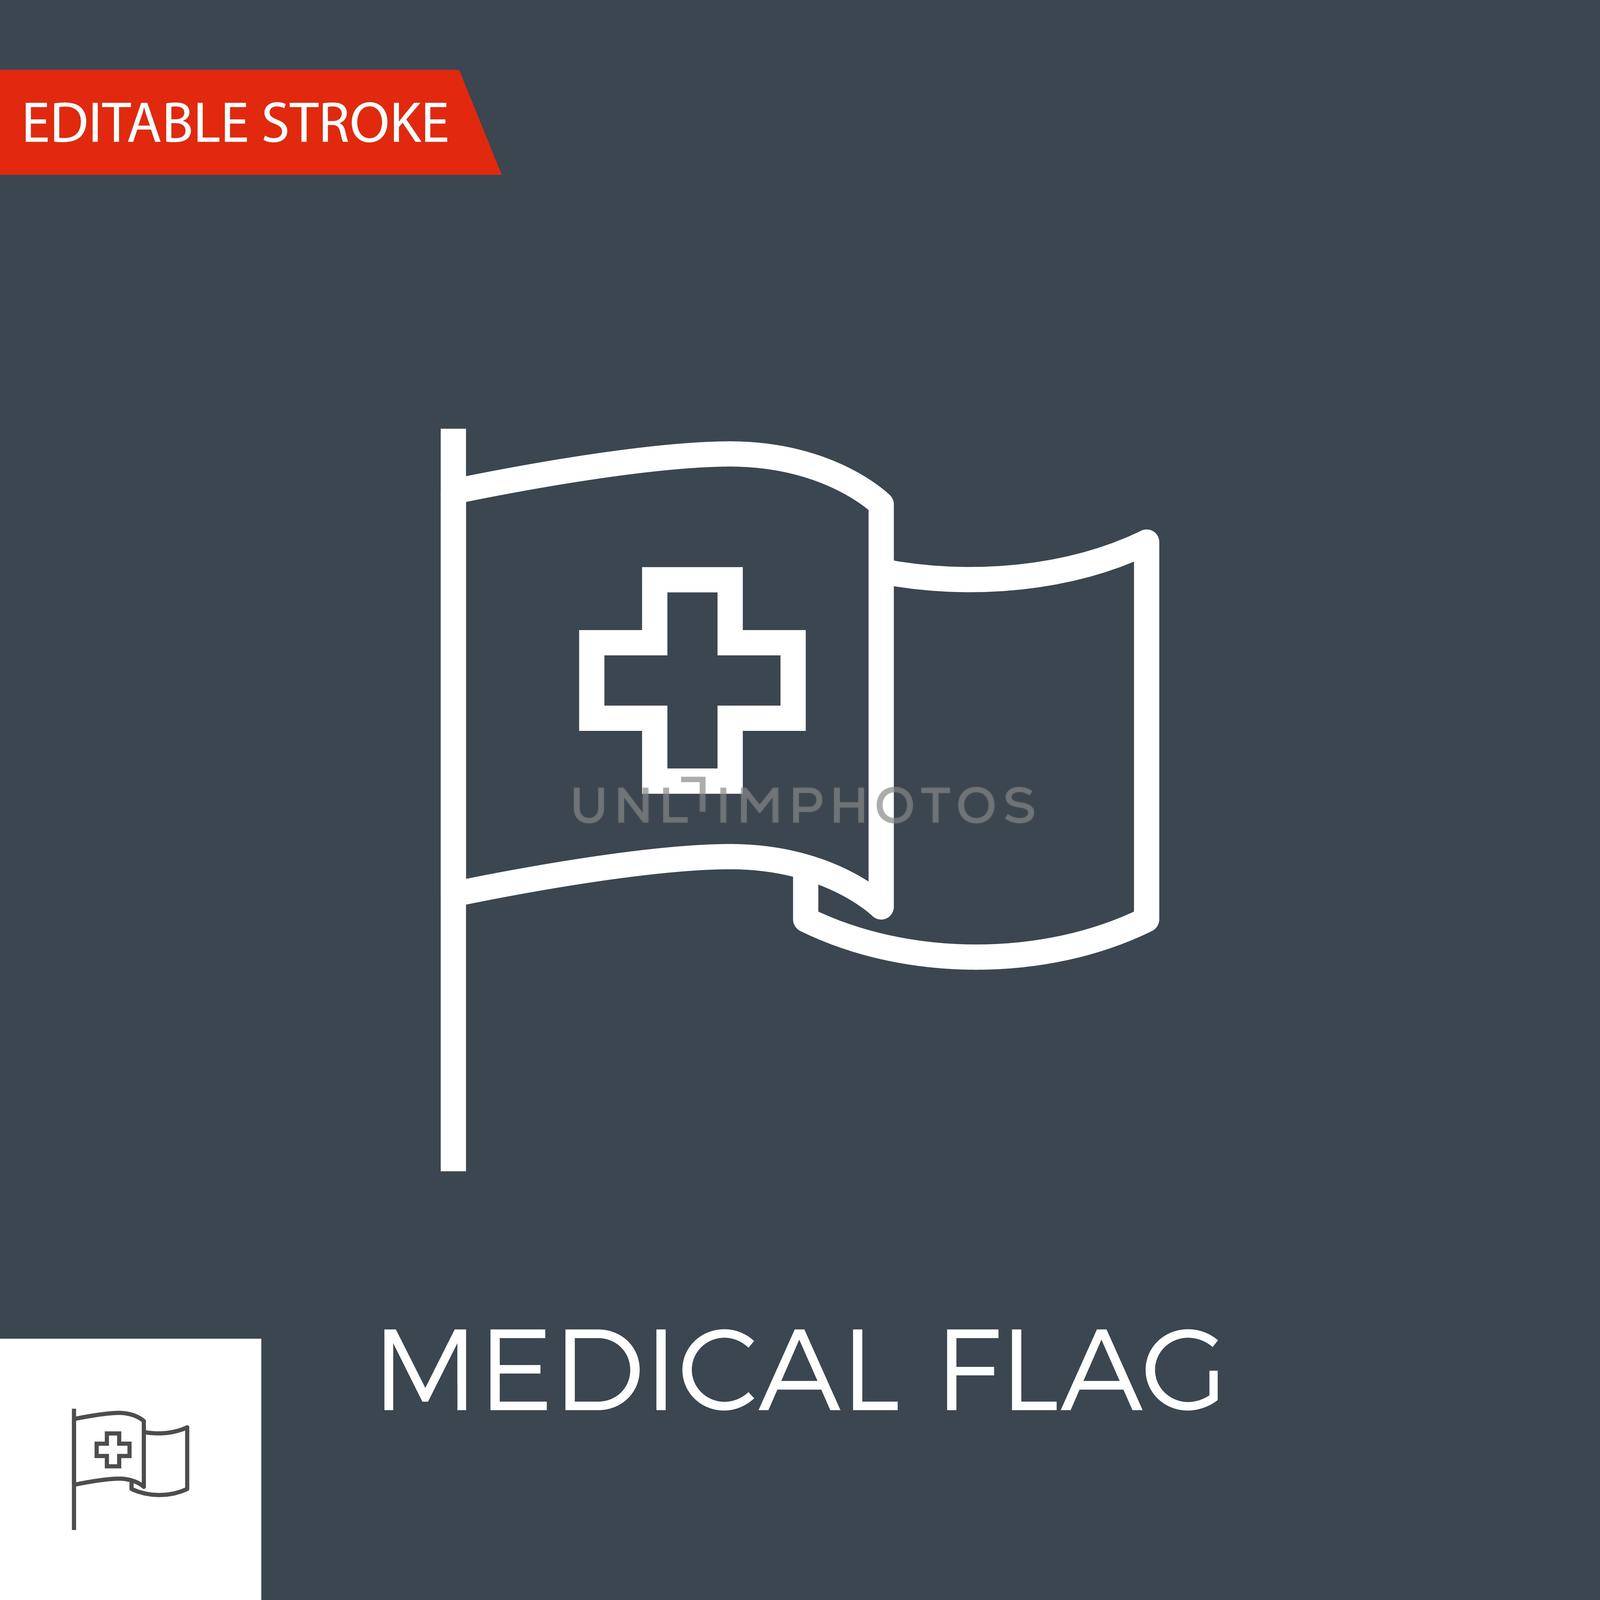 Medical Flag Thin Line Vector Icon. Flat Icon Isolated on the Black Background. Editable Stroke EPS file. Vector illustration.